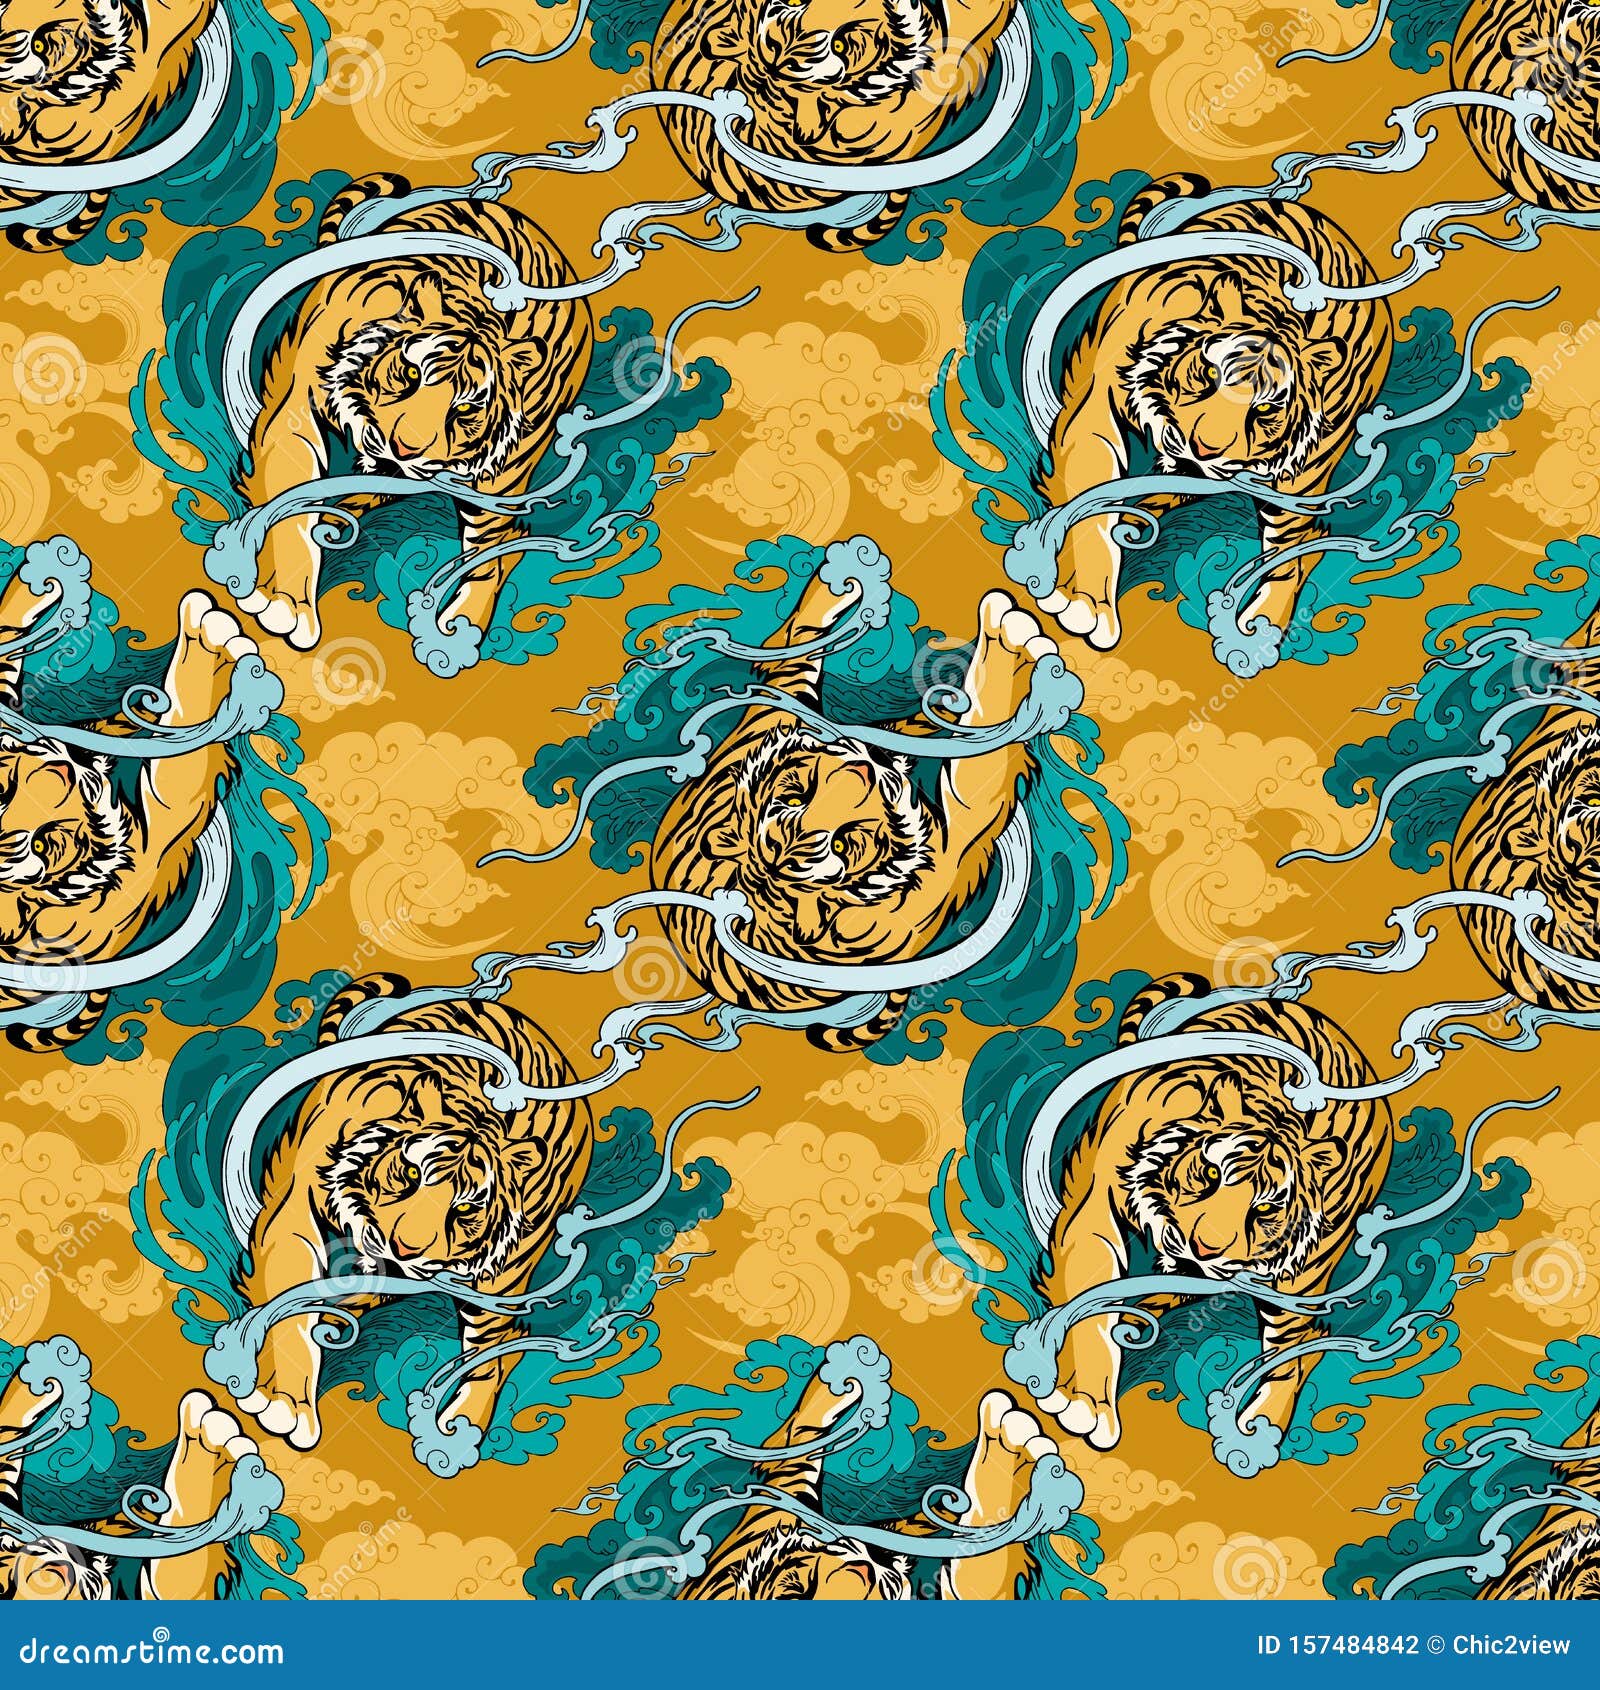  doodle and paint tiger walking  on cloud or haven  doodle and paint  for seamless pattern with  yel